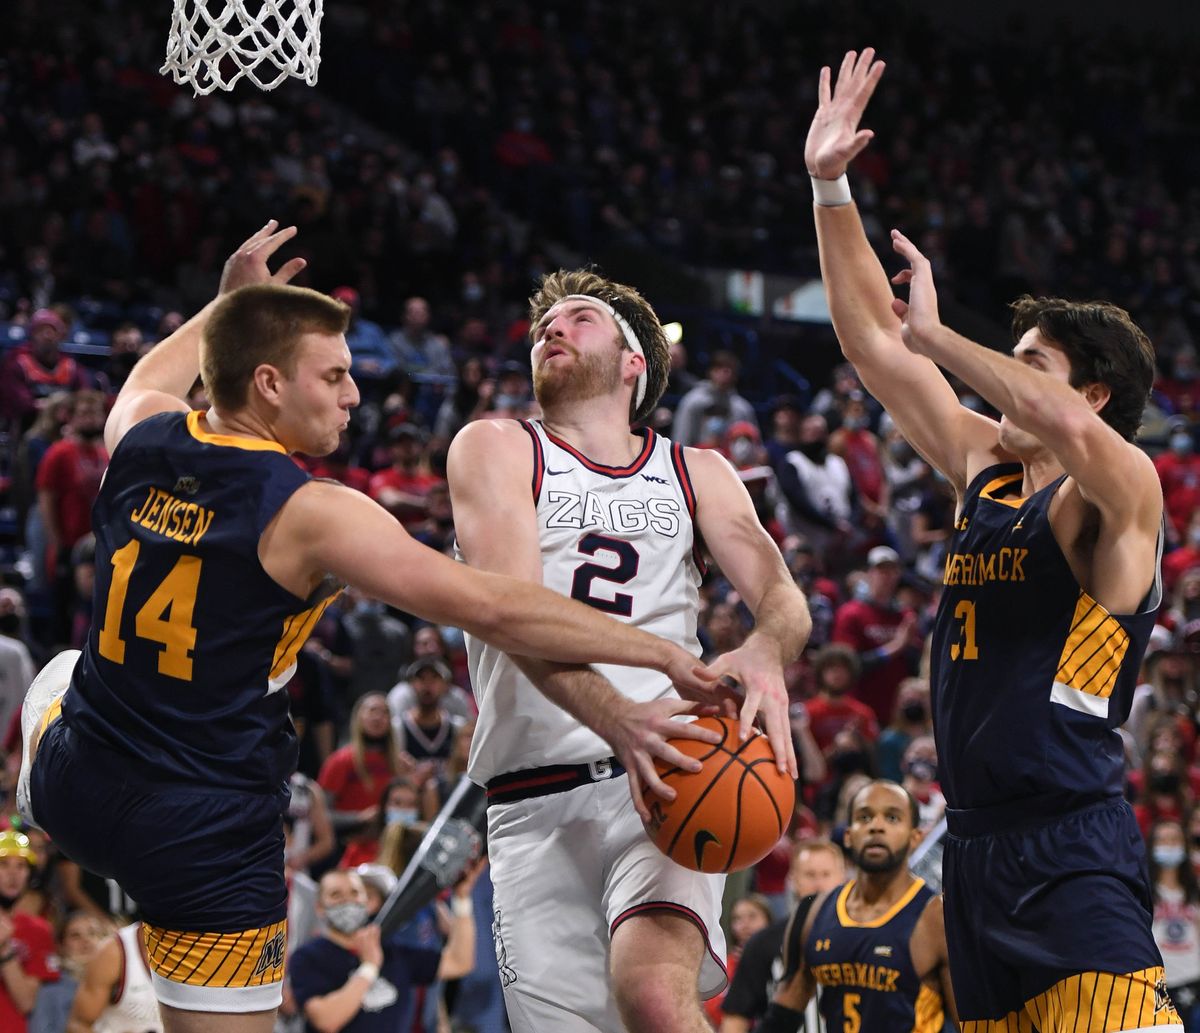 Gonzaga forward Drew Timme (2) is fouled by Merrimack guard Devin Jensen (14) during an NCAA college basketball game, Thursday, Dec. 9, 2021, in the McCarthey Athletic Center.  (COLIN MULVANY/THE SPOKESMAN-REVIEW)